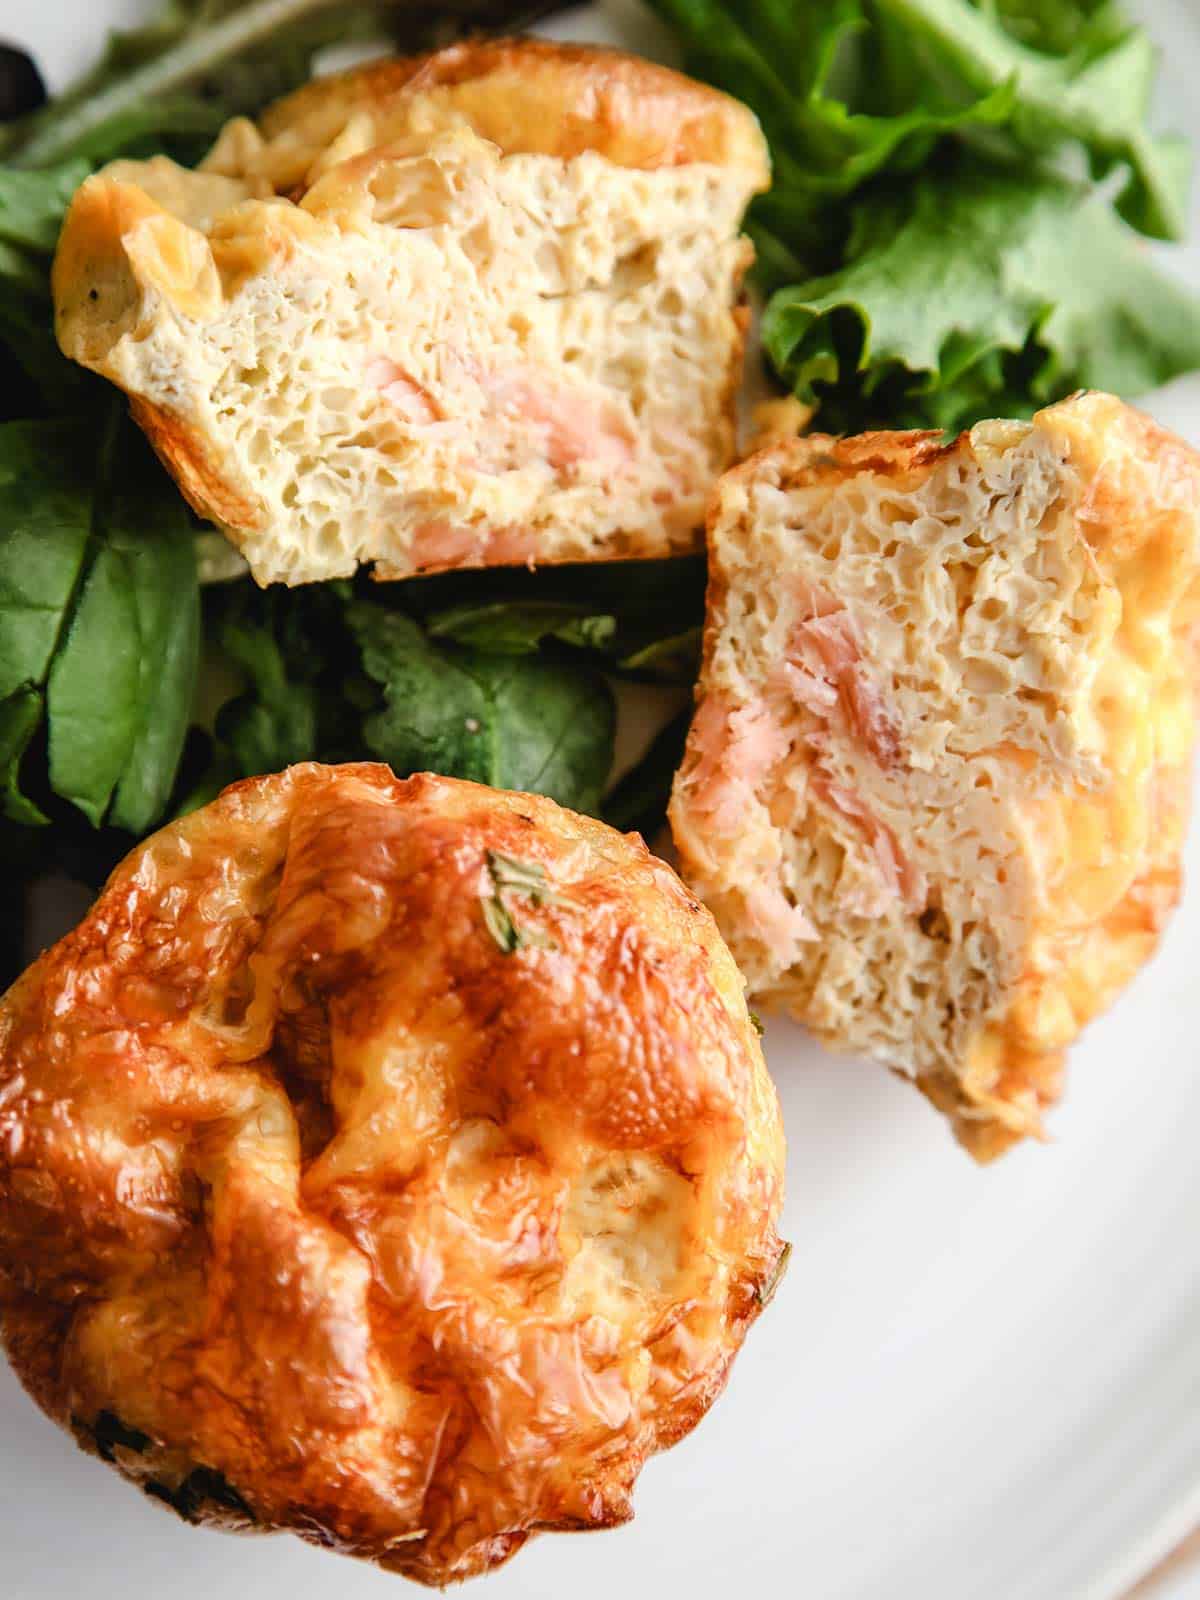 Two smoked salmon breakfast muffins on a bed of green lettuce.